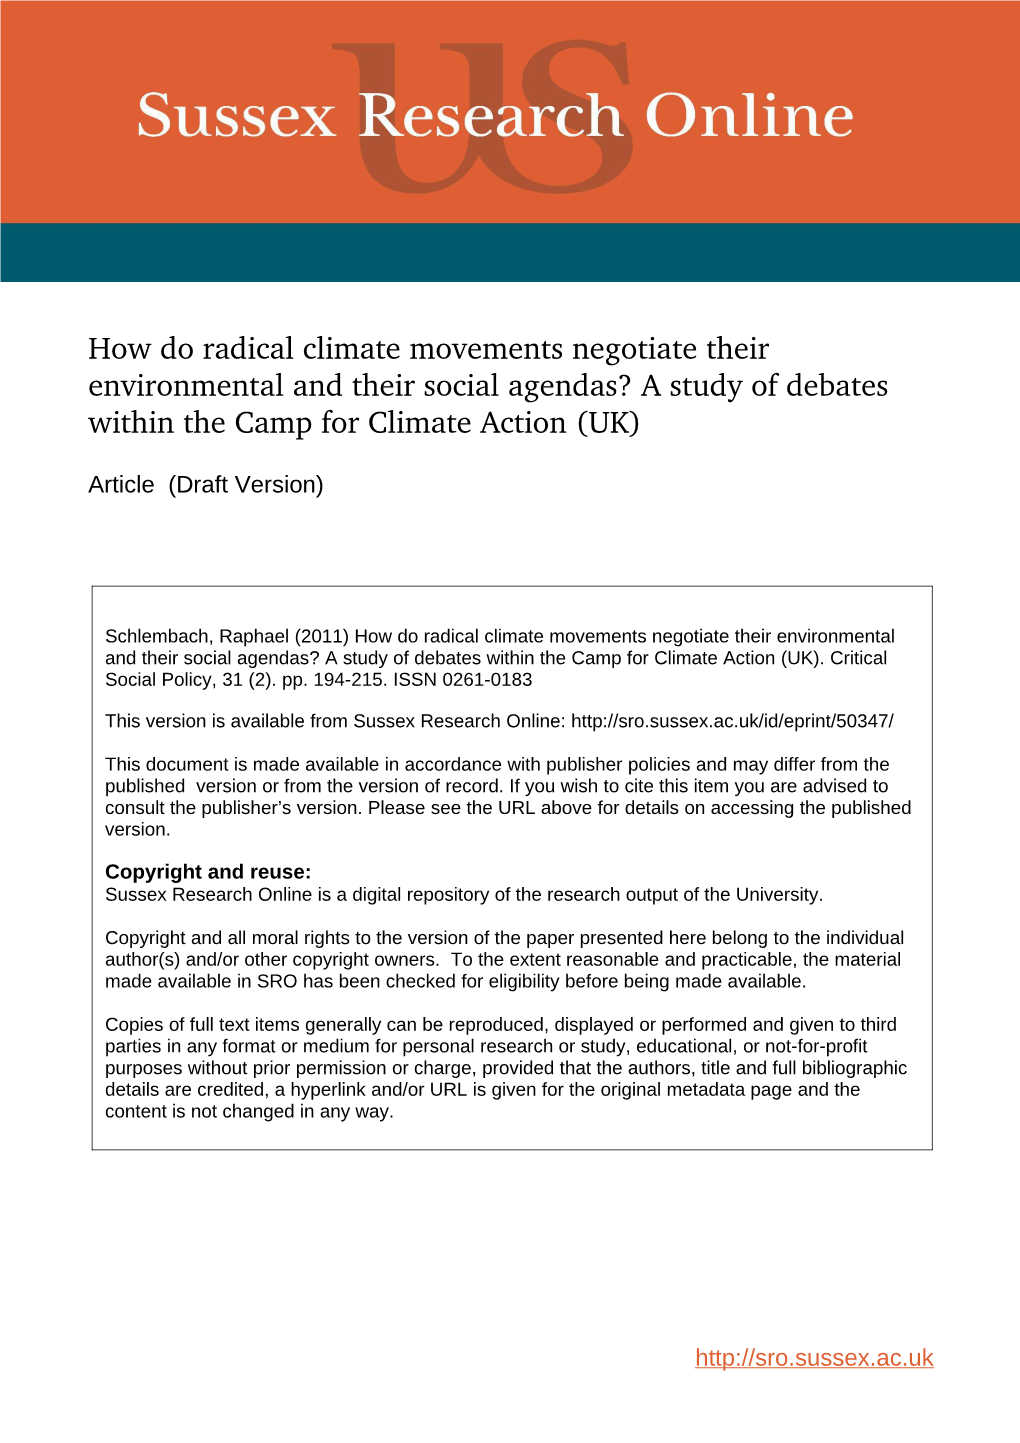 How Do Radical Climate Movements Negotiate Their Environmental and Their Social Agendas? a Study of Debates Within the Camp for Climate Action (UK)